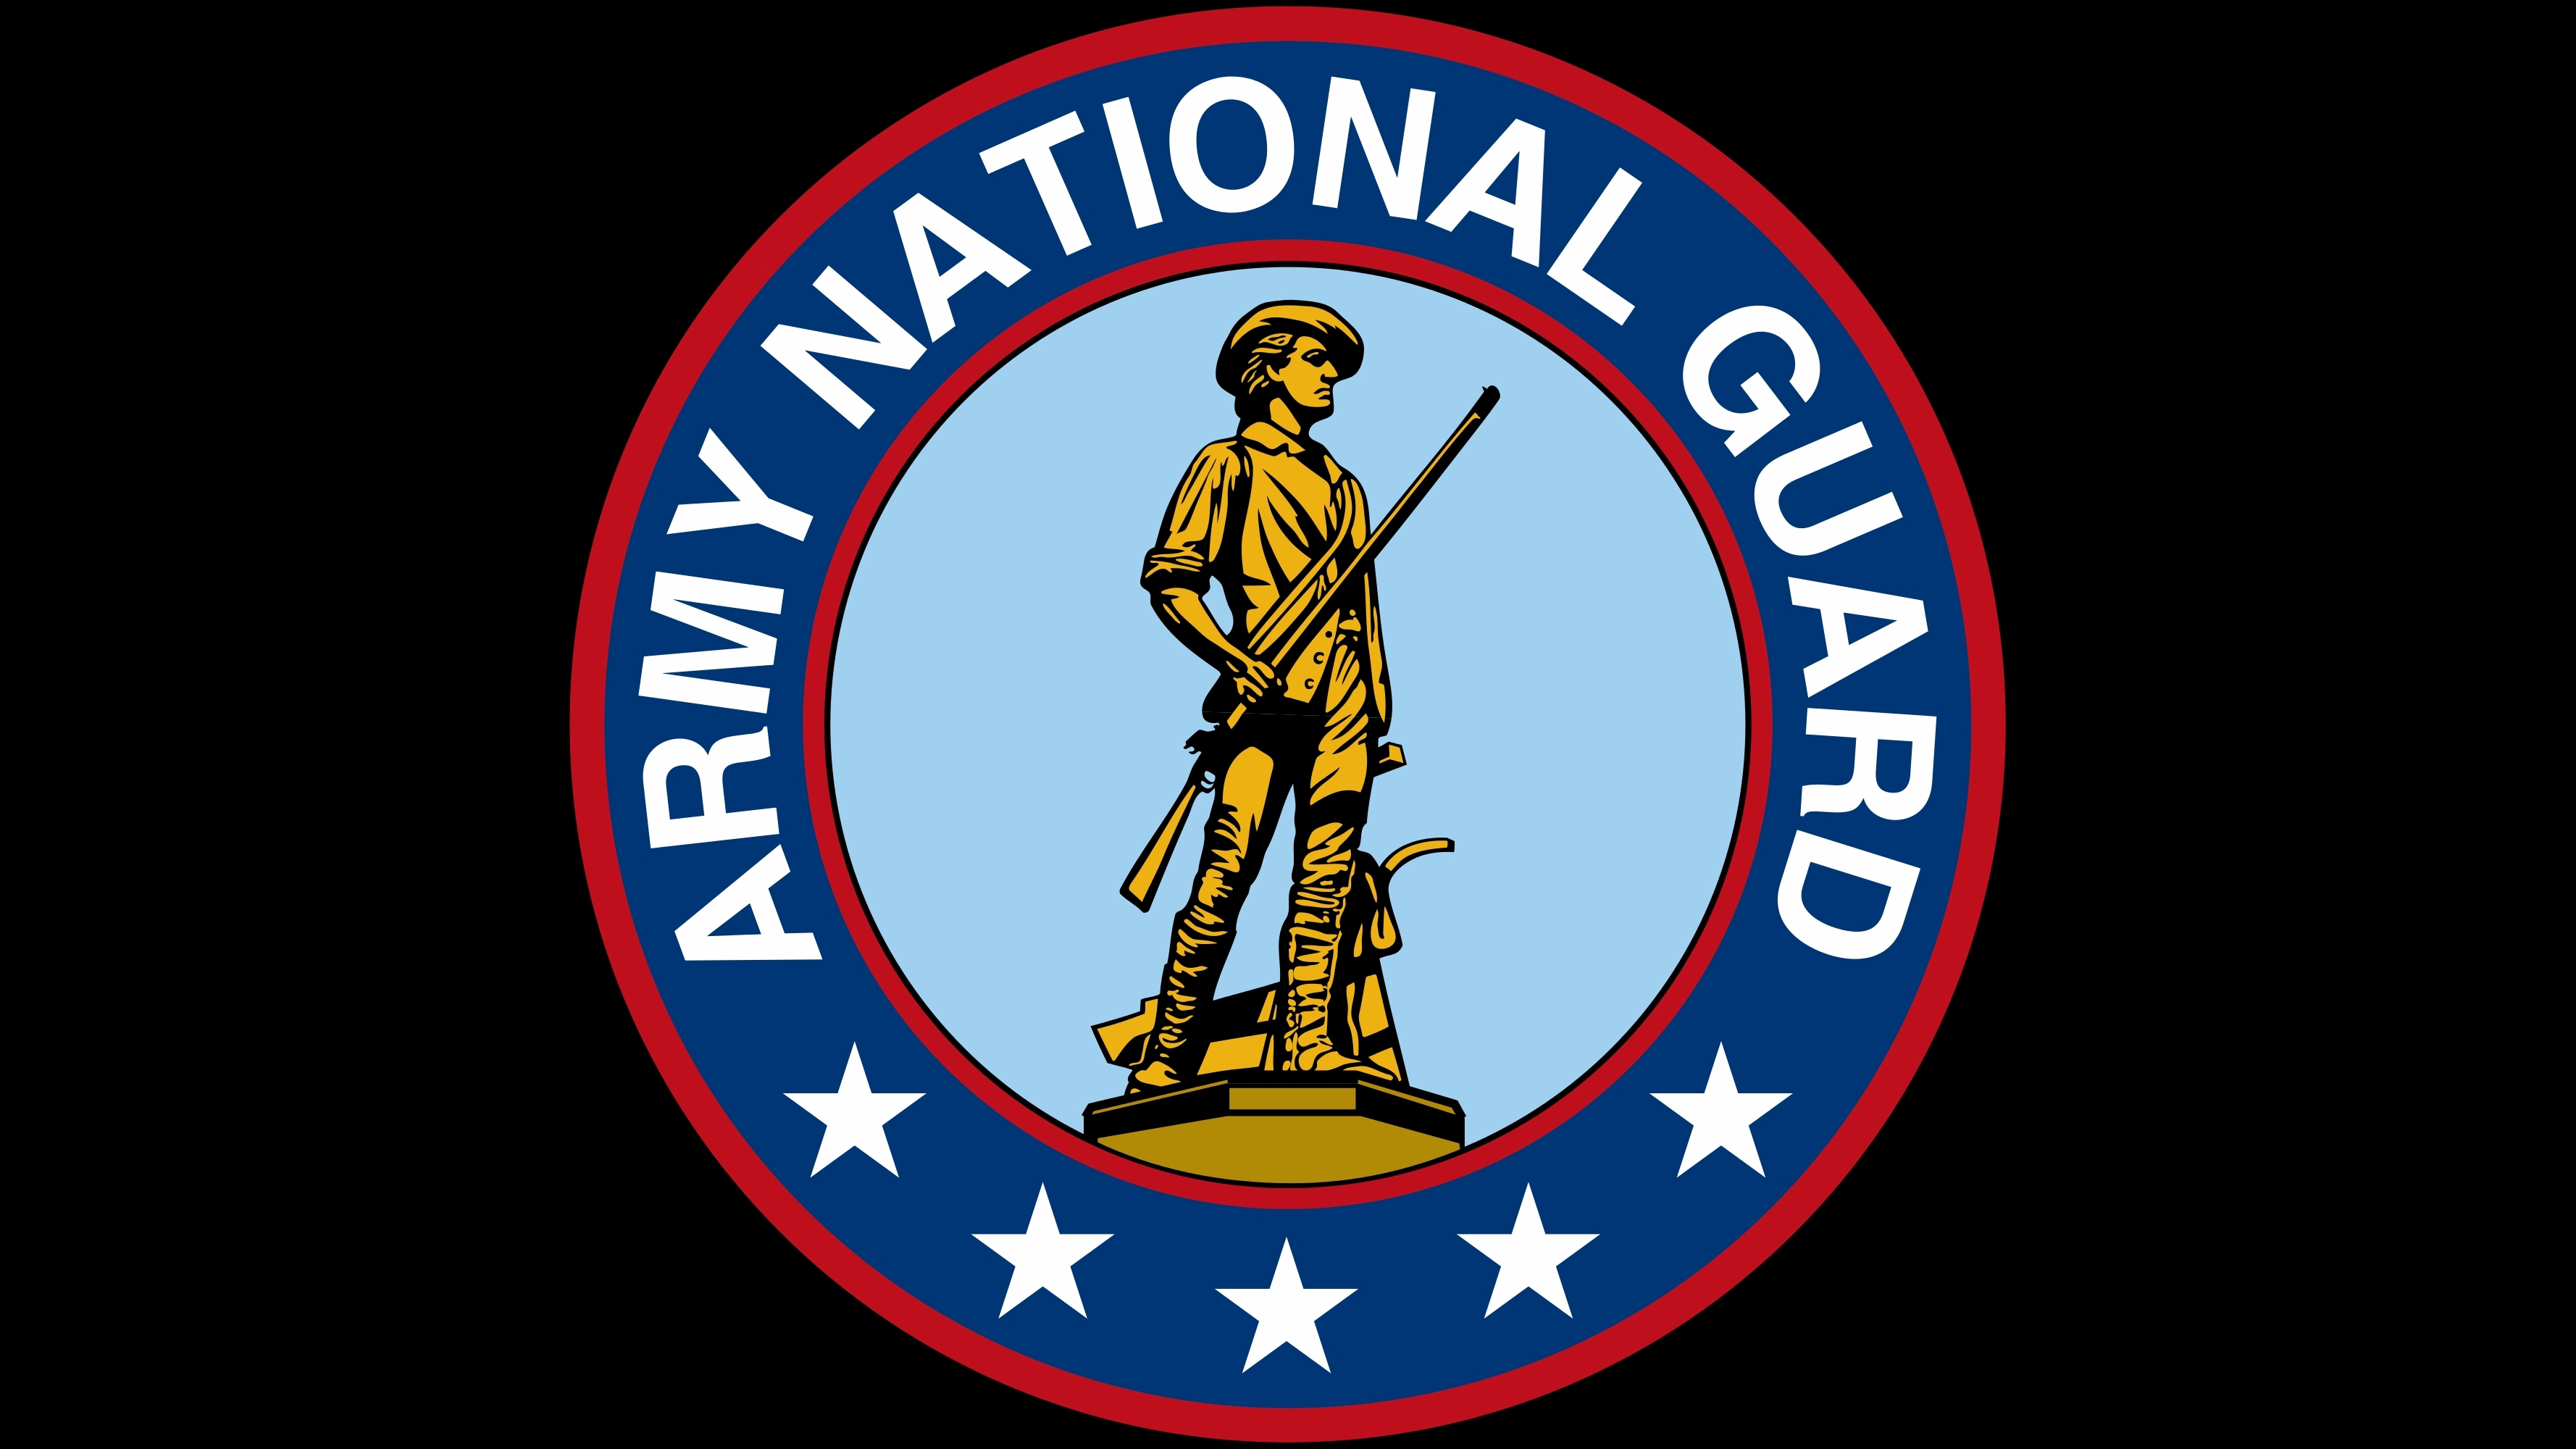 Military National Guard 3556x2000